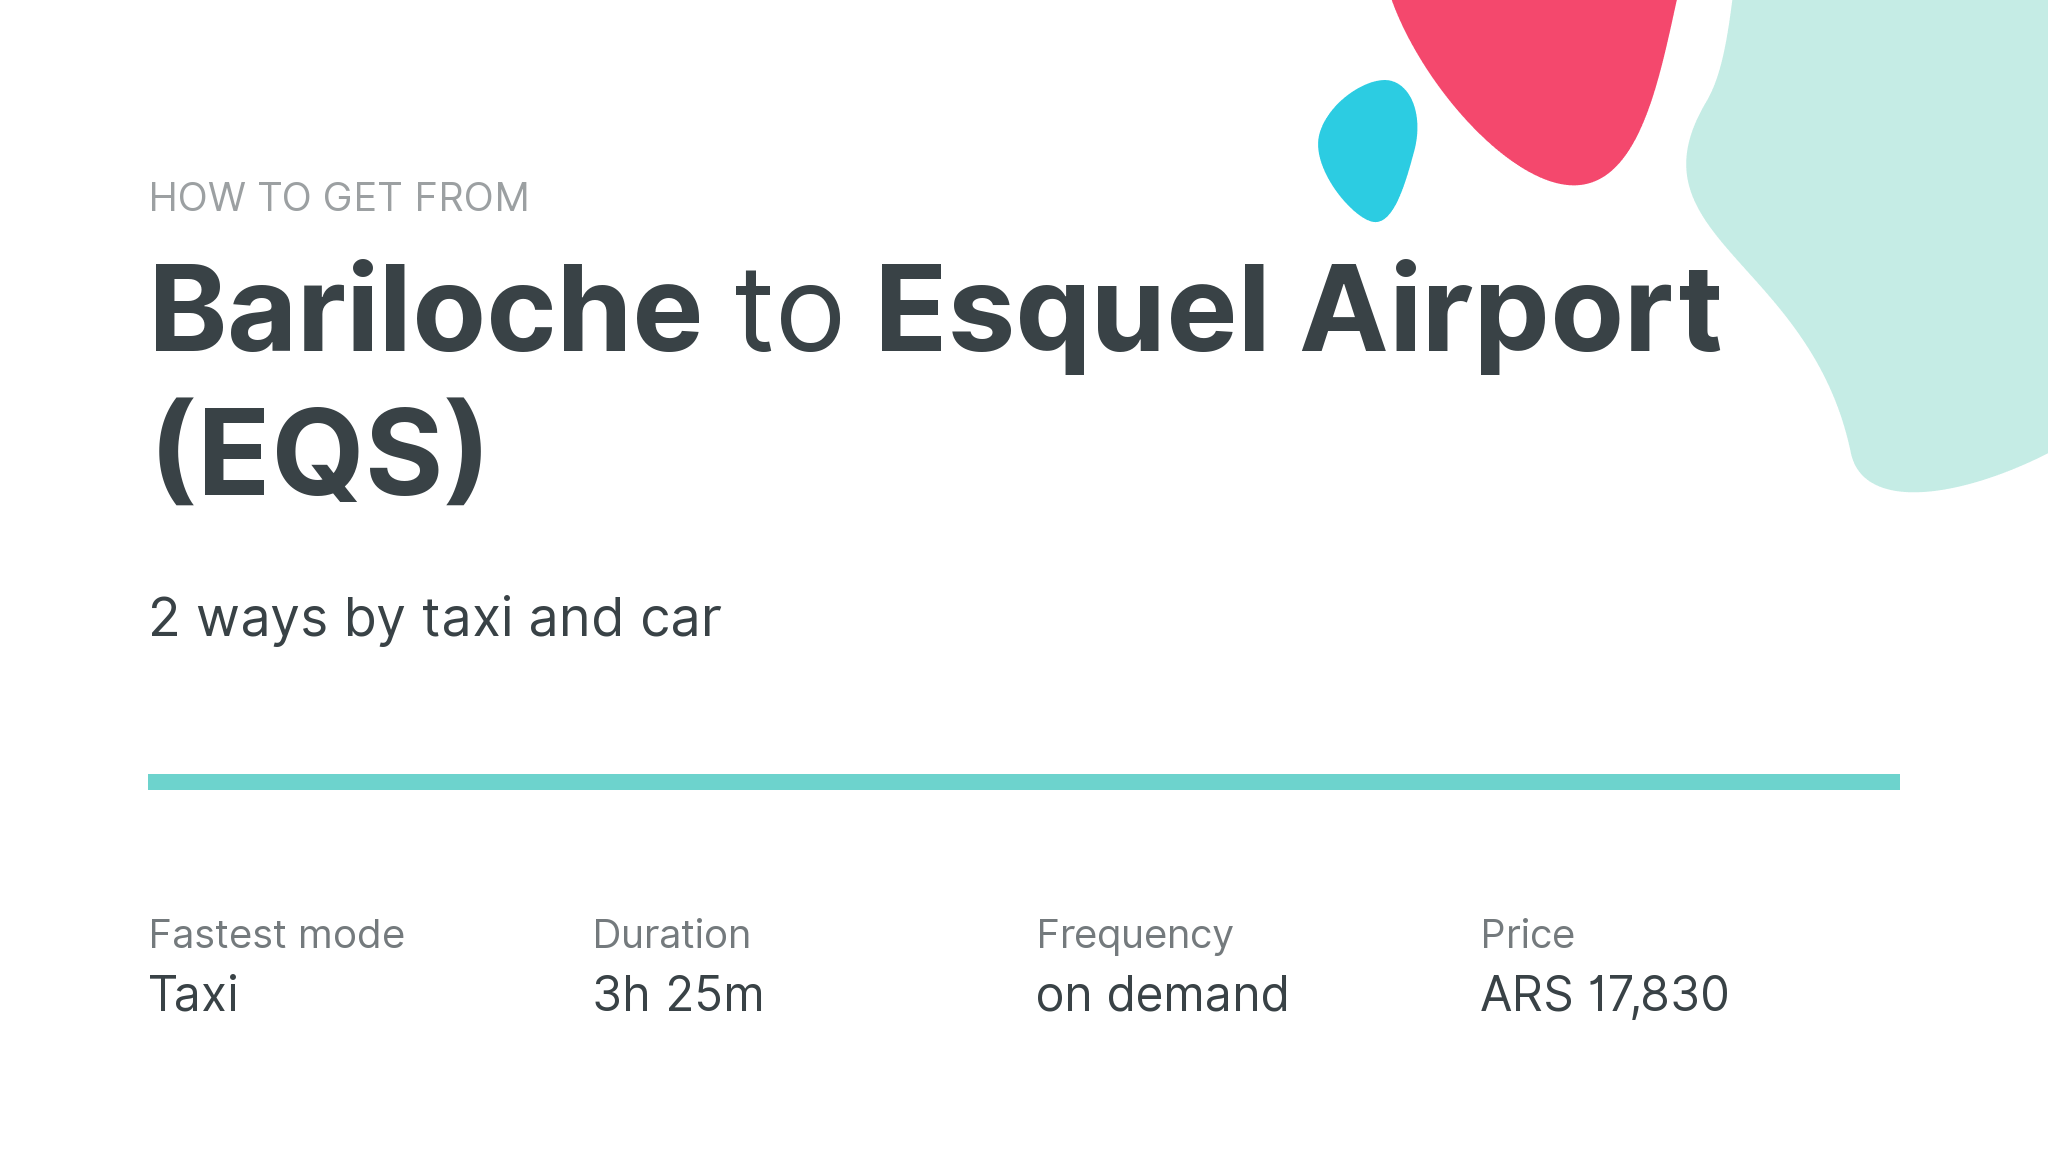 How do I get from Bariloche to Esquel Airport (EQS)